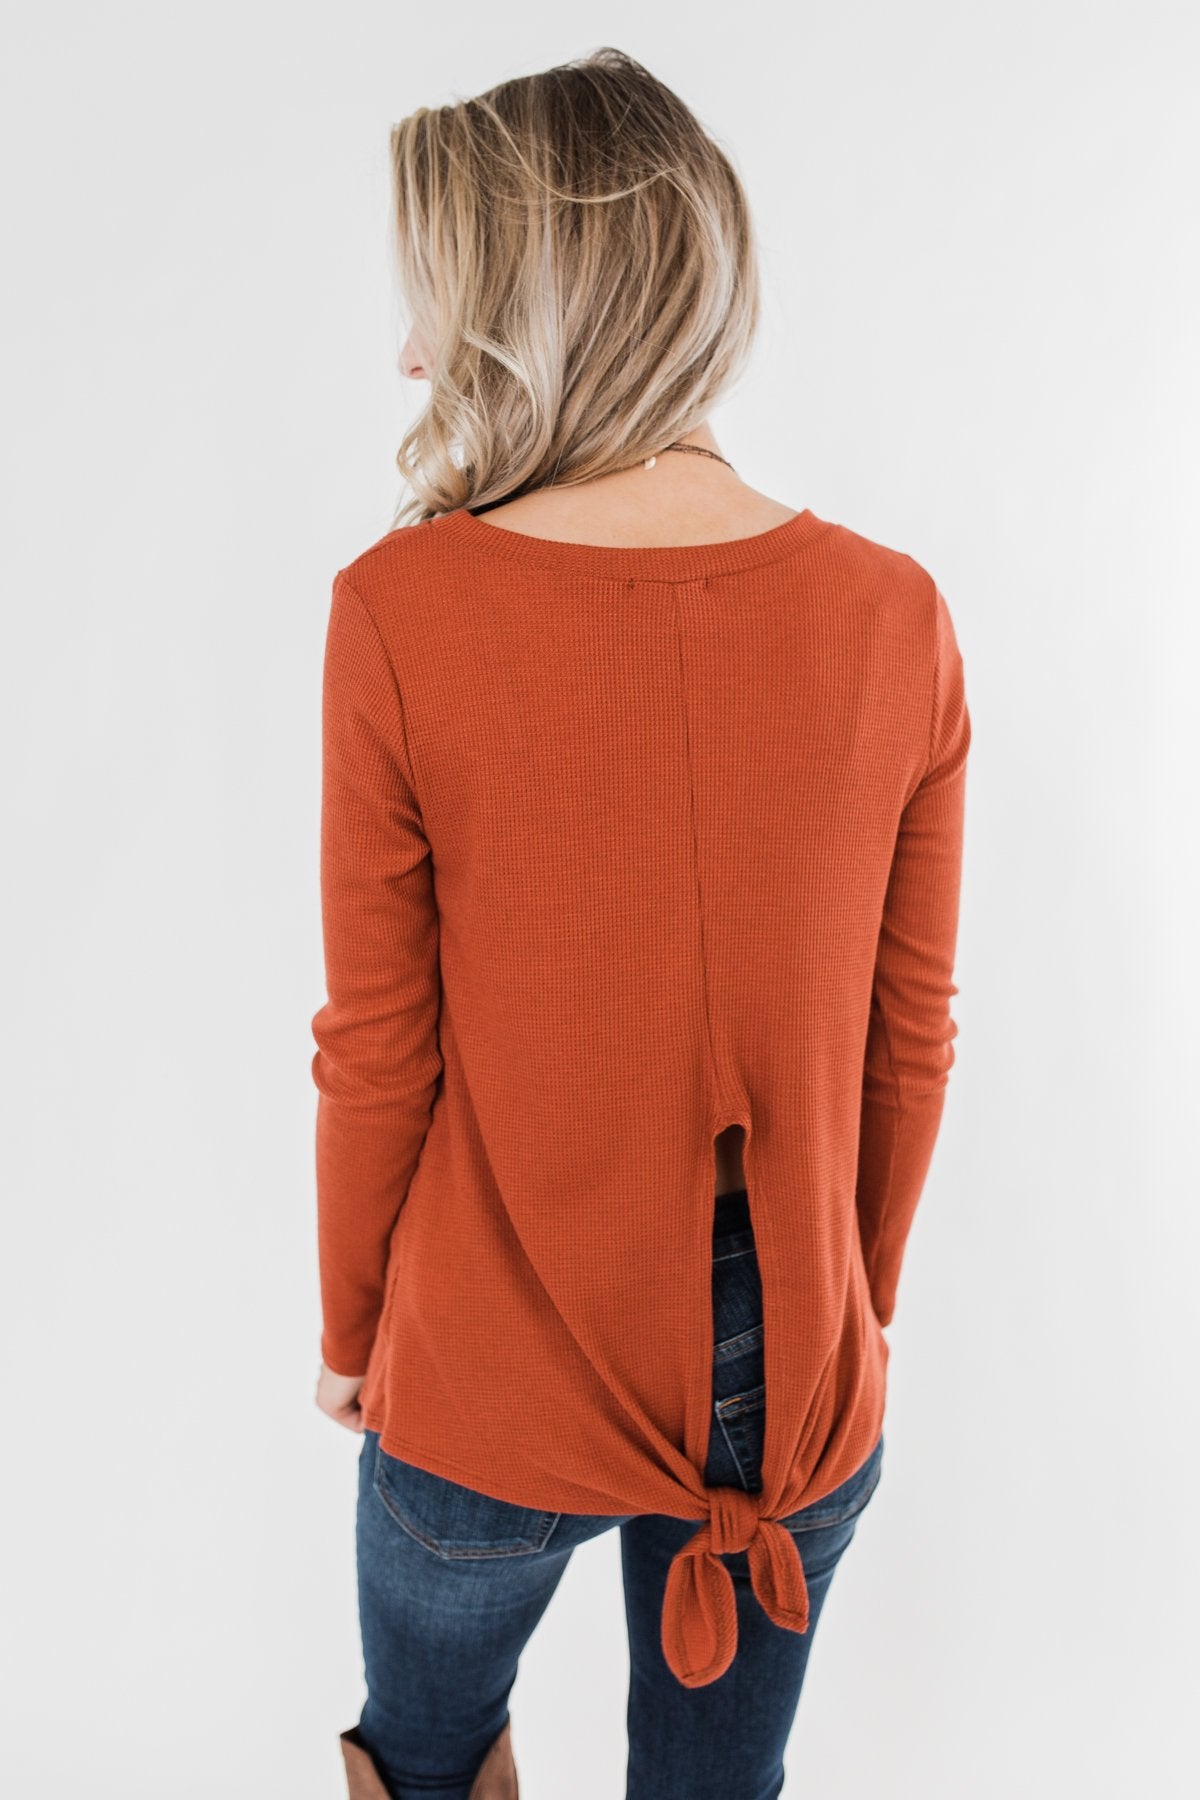 The Best I Can Long Sleeve Top- Burnt Orange